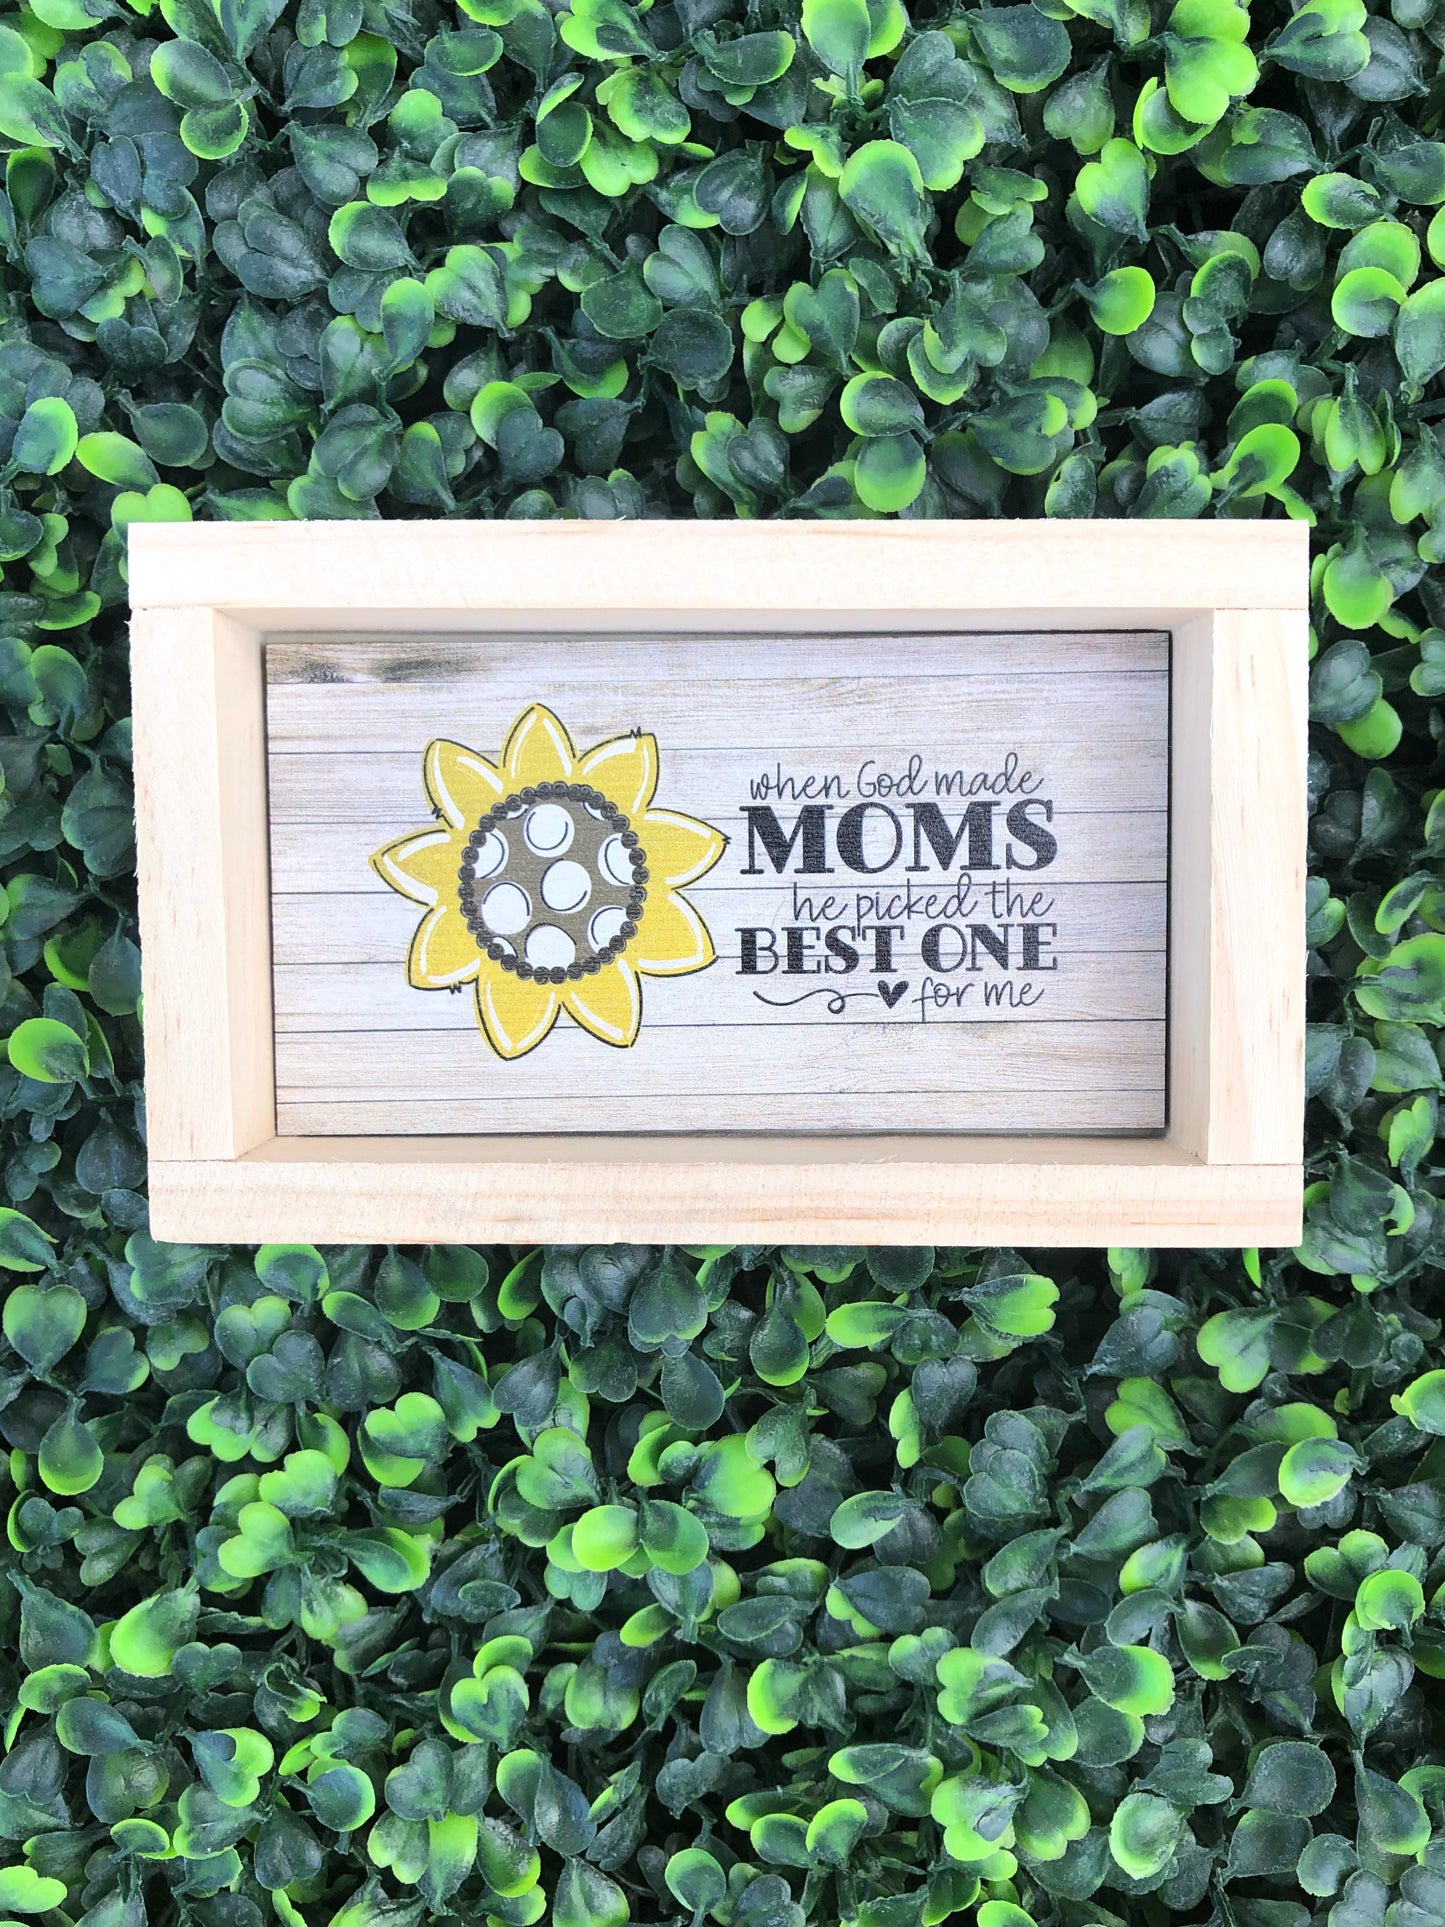 5" x 3" When God made Moms mini wooden sign